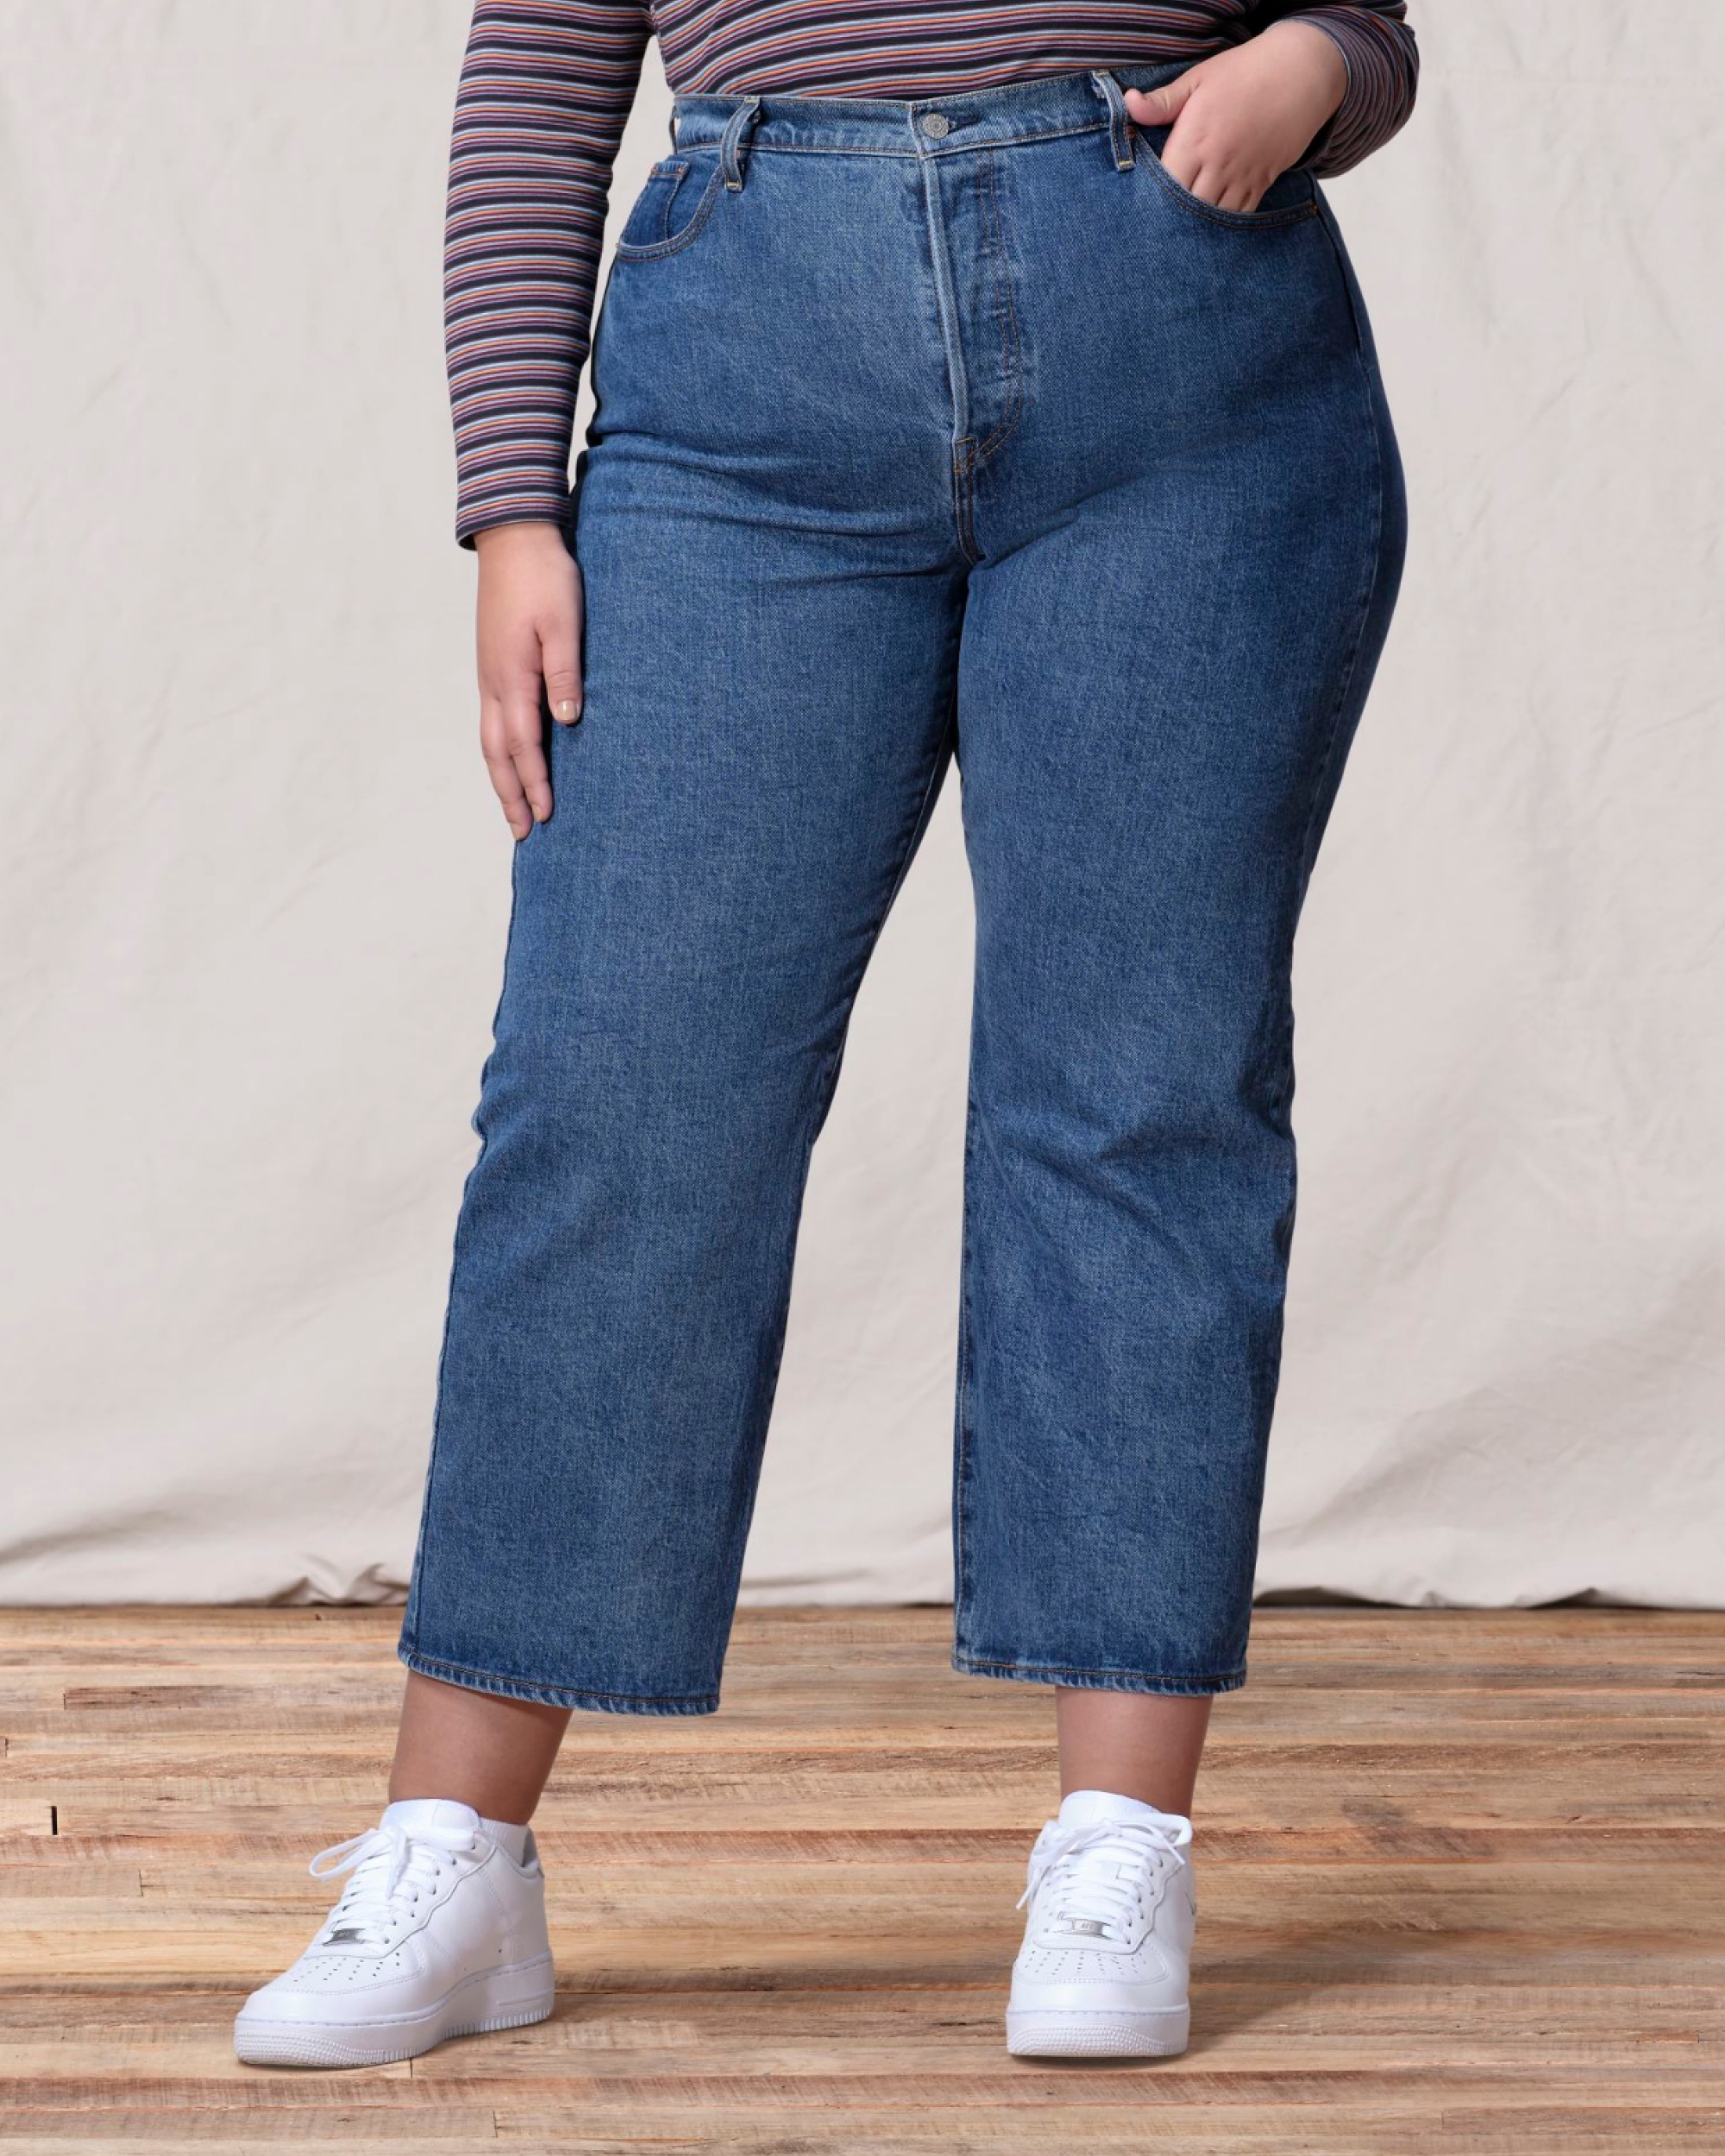 high waisted levis jeans